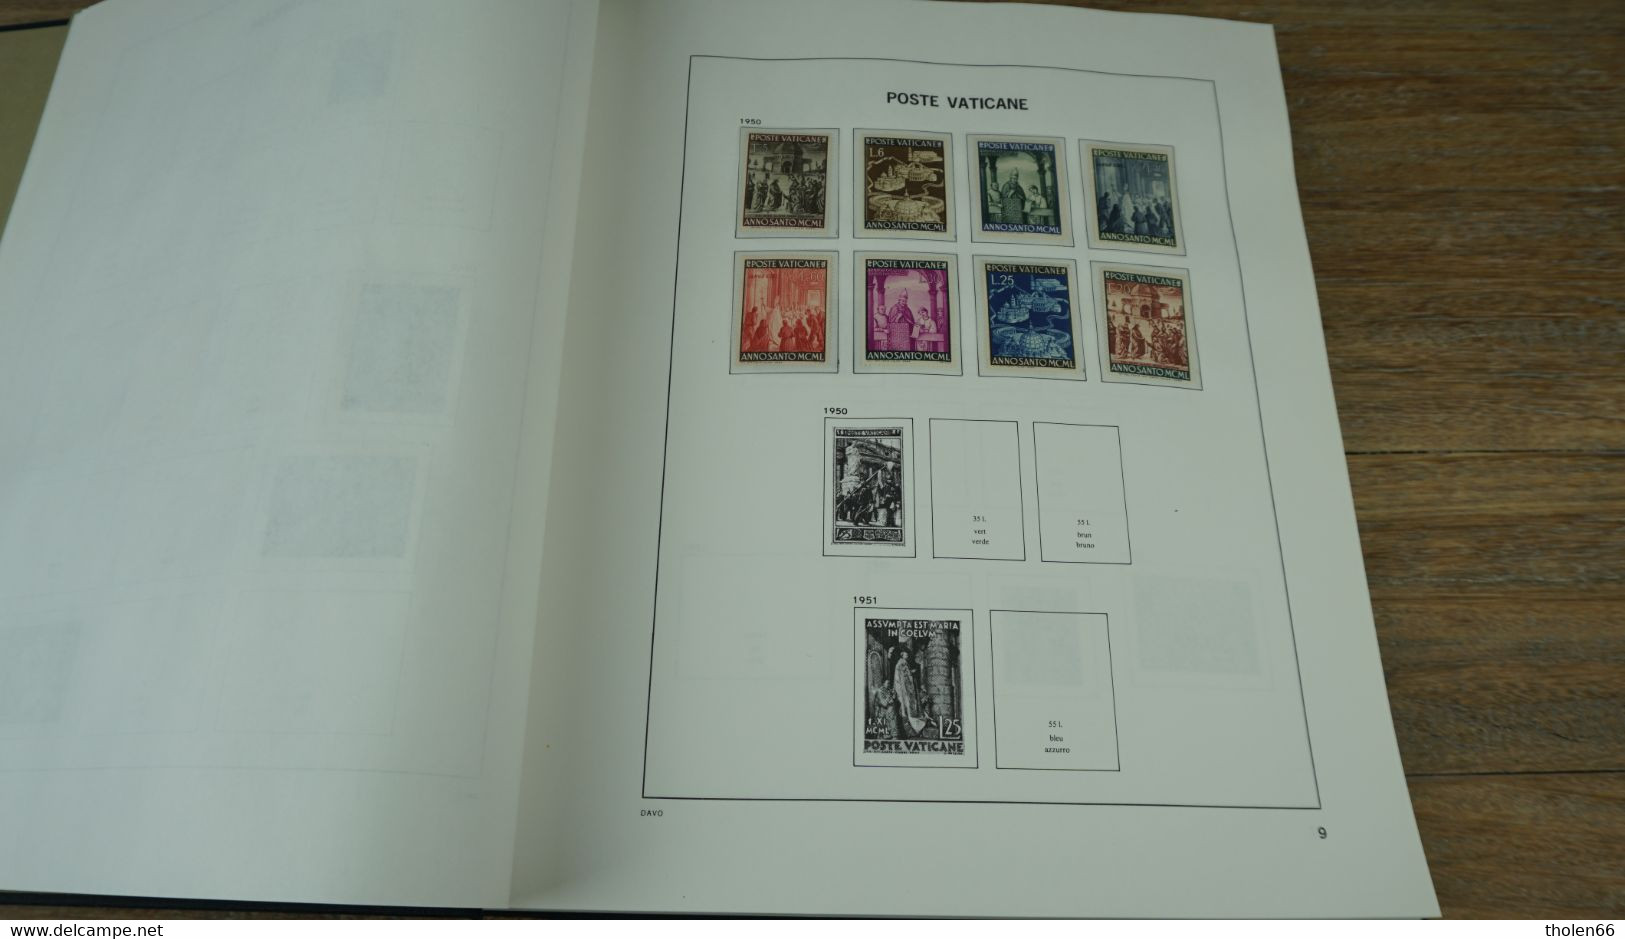 Vatican Poste - Album DAVO  1852 - 2001 - Nice collection (incomplete) ** mint never hinged.